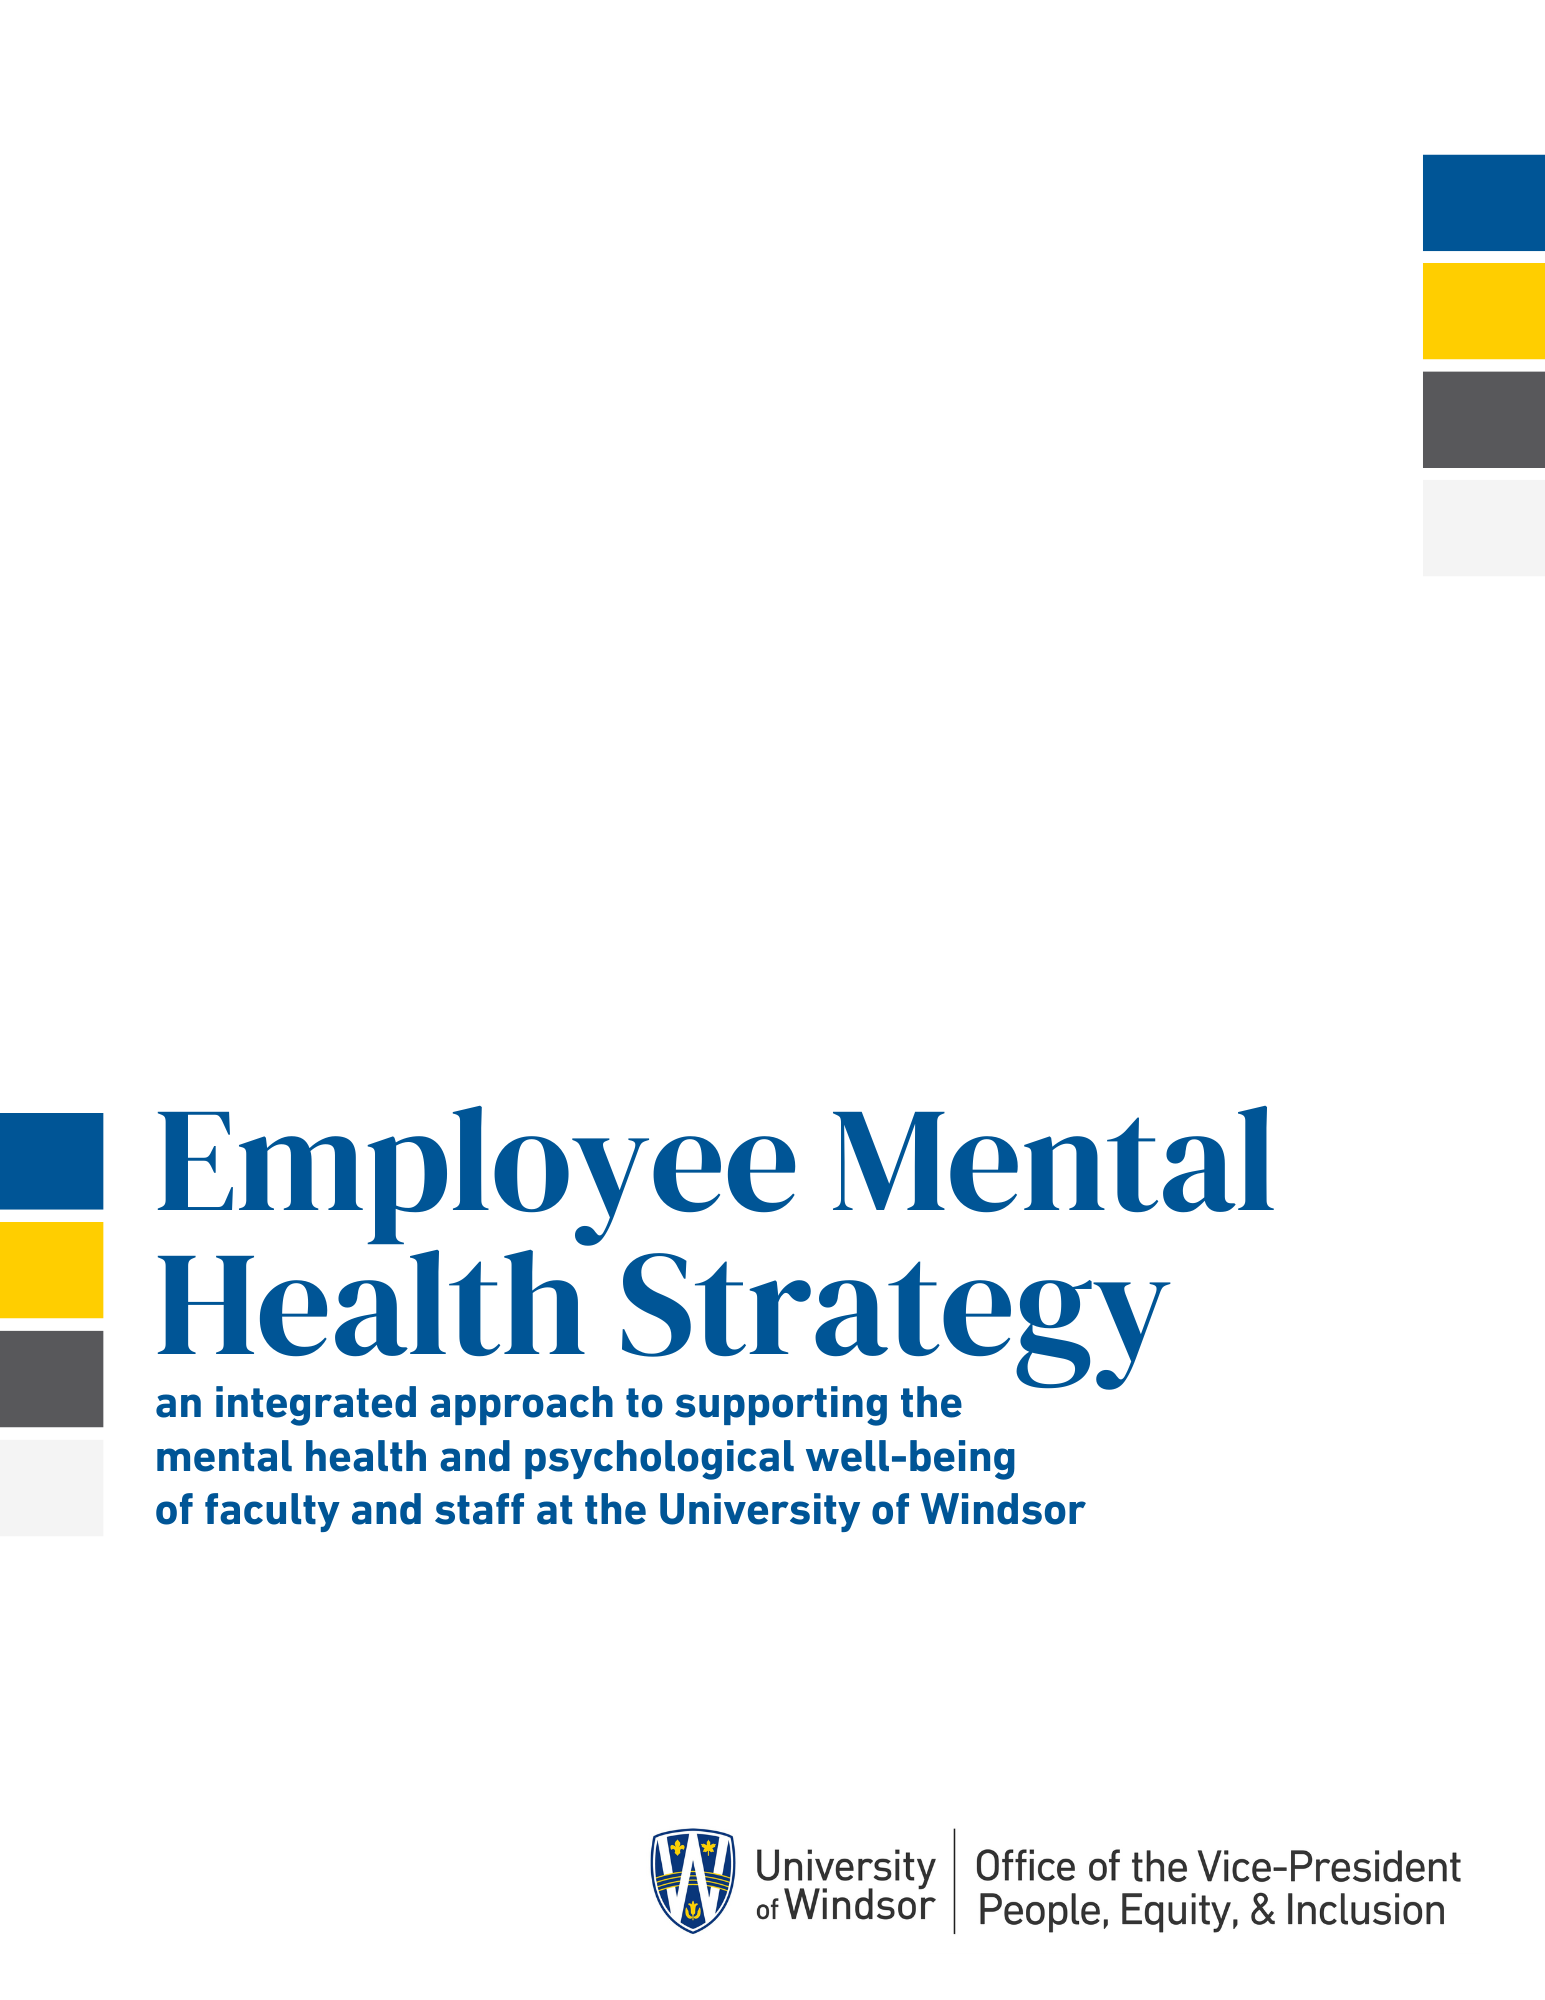 Thumbnail of Employee Mental Health Strategy document